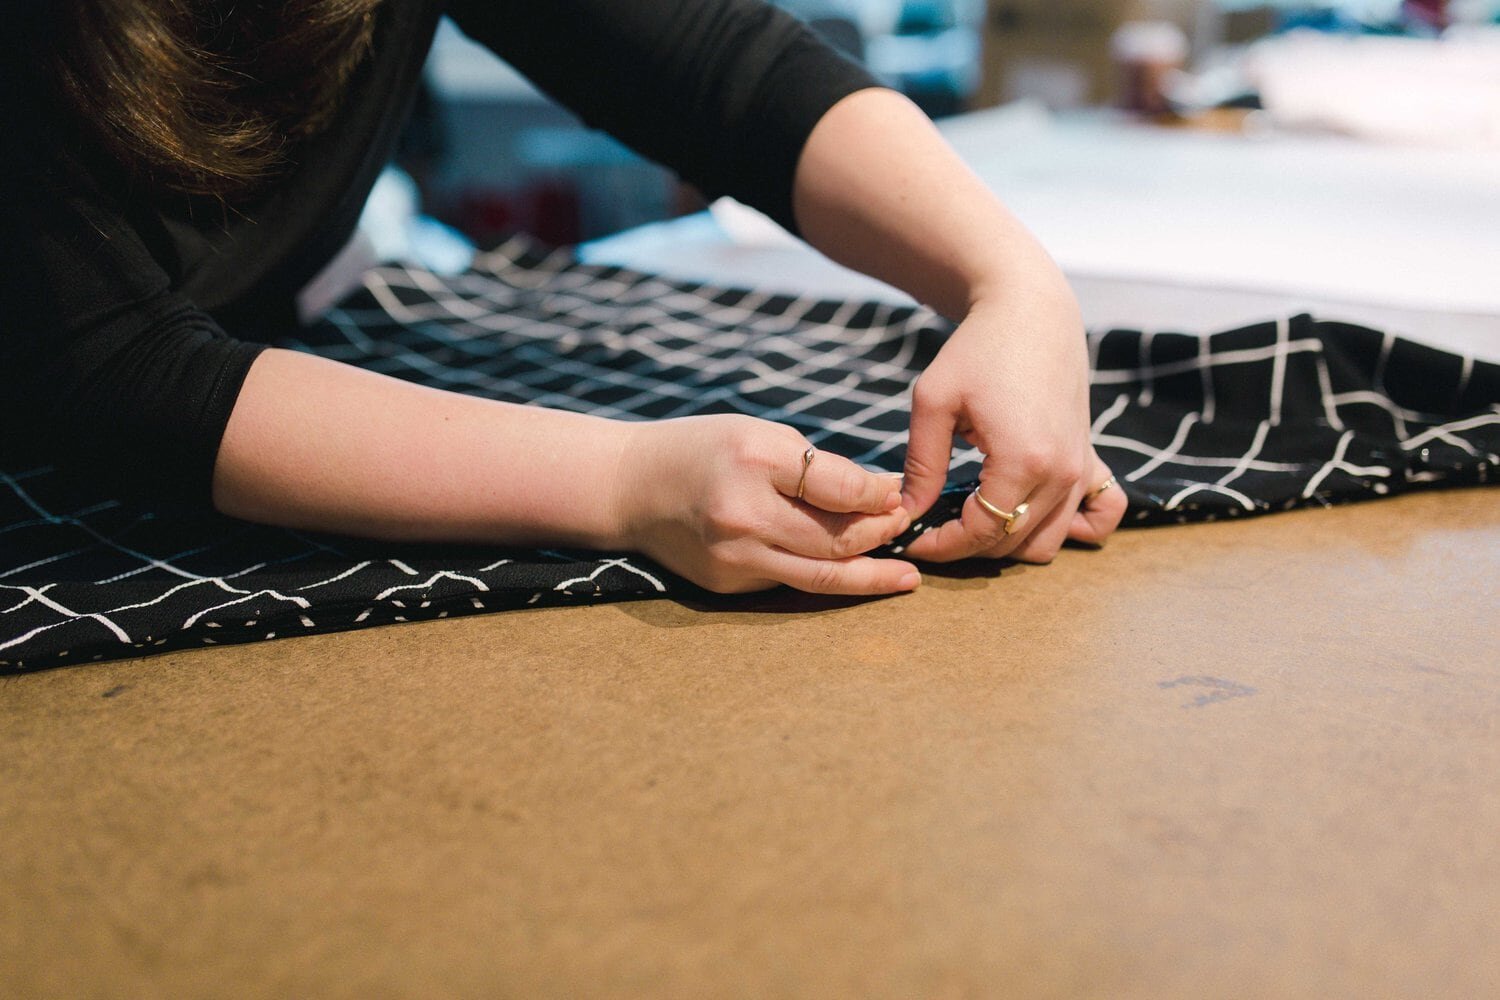 Advanced Sewing and Clothing Design Class